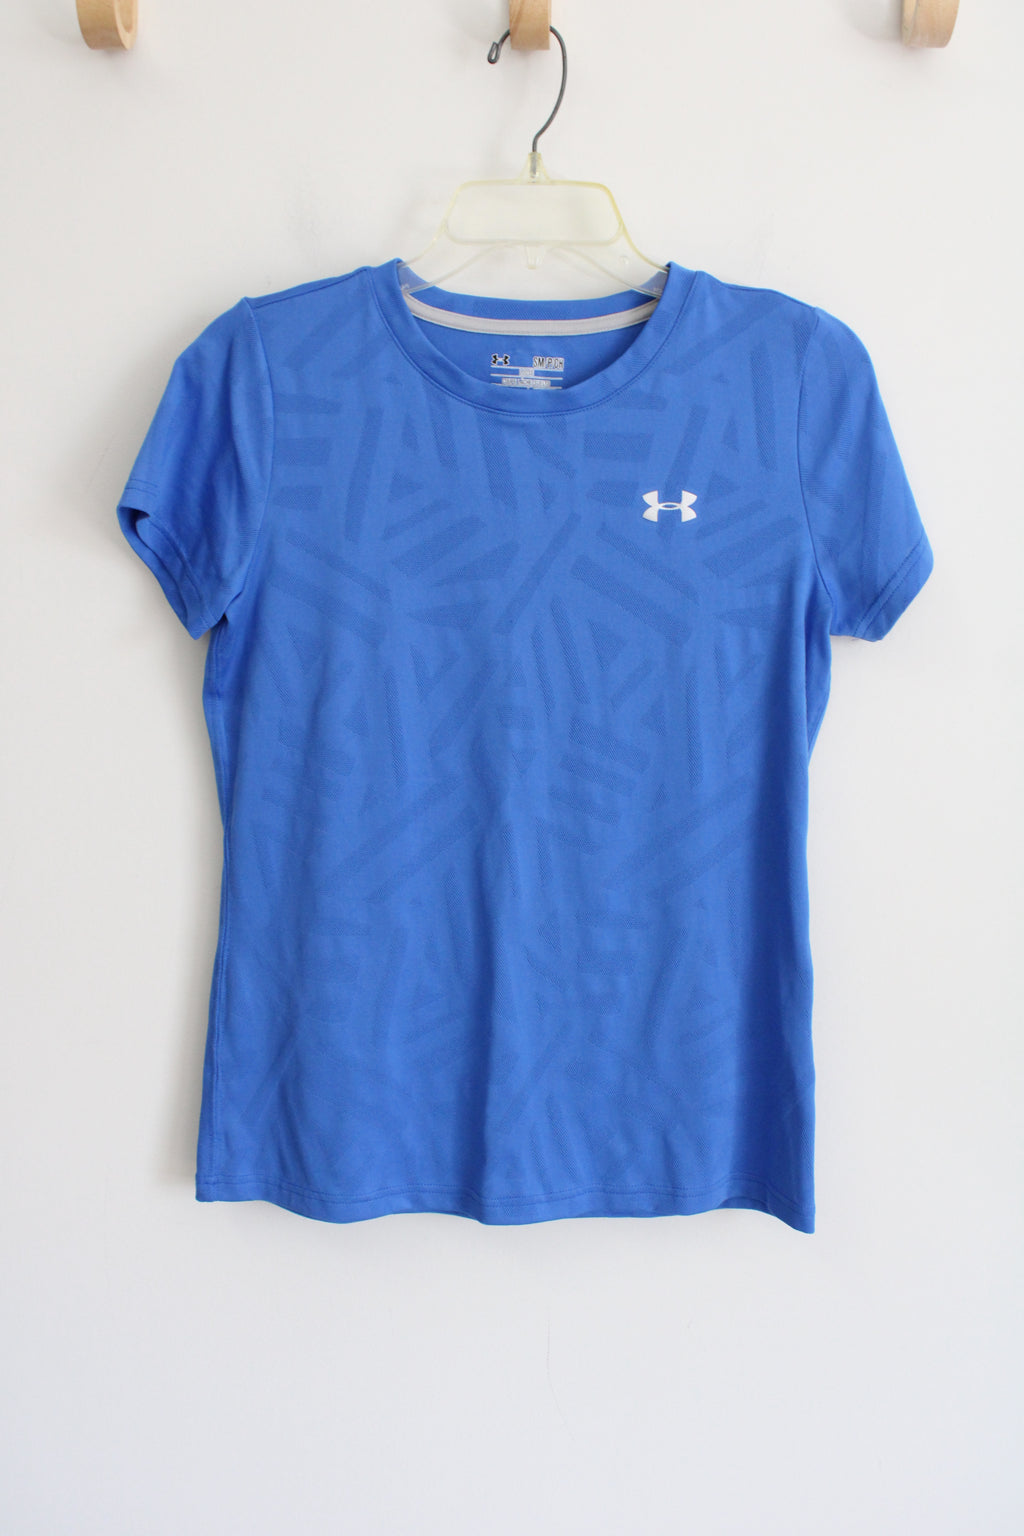 Under Armour Loose Fit Blue Shirt | S